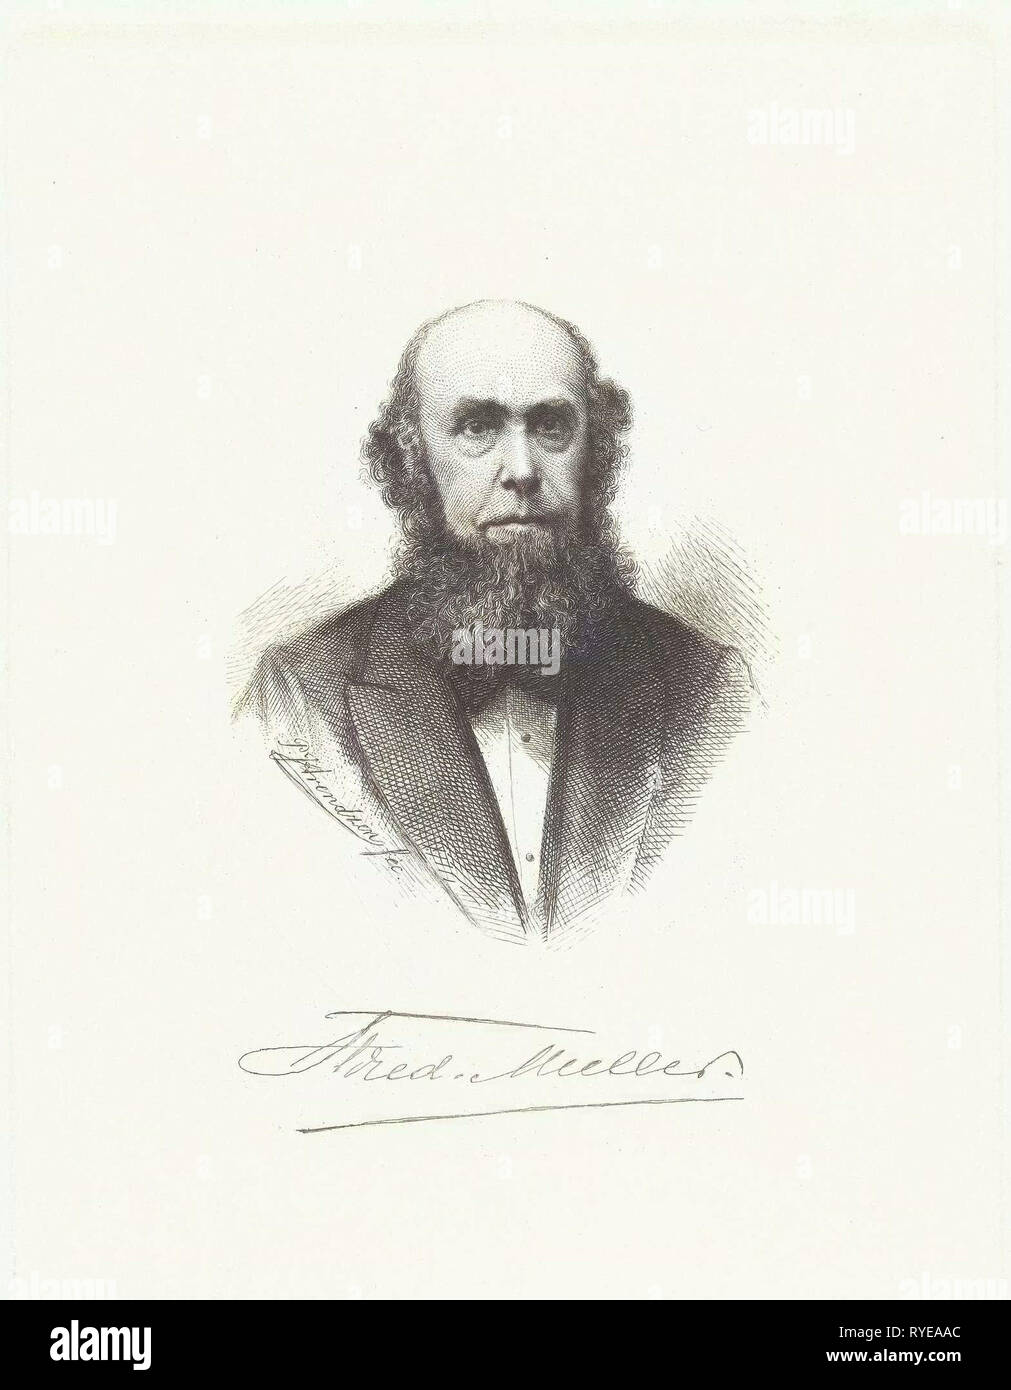 Portrait of Frederick Muller, Petrus Johannes Arendzen, c. 1879 - in or before 1881 Stock Photo